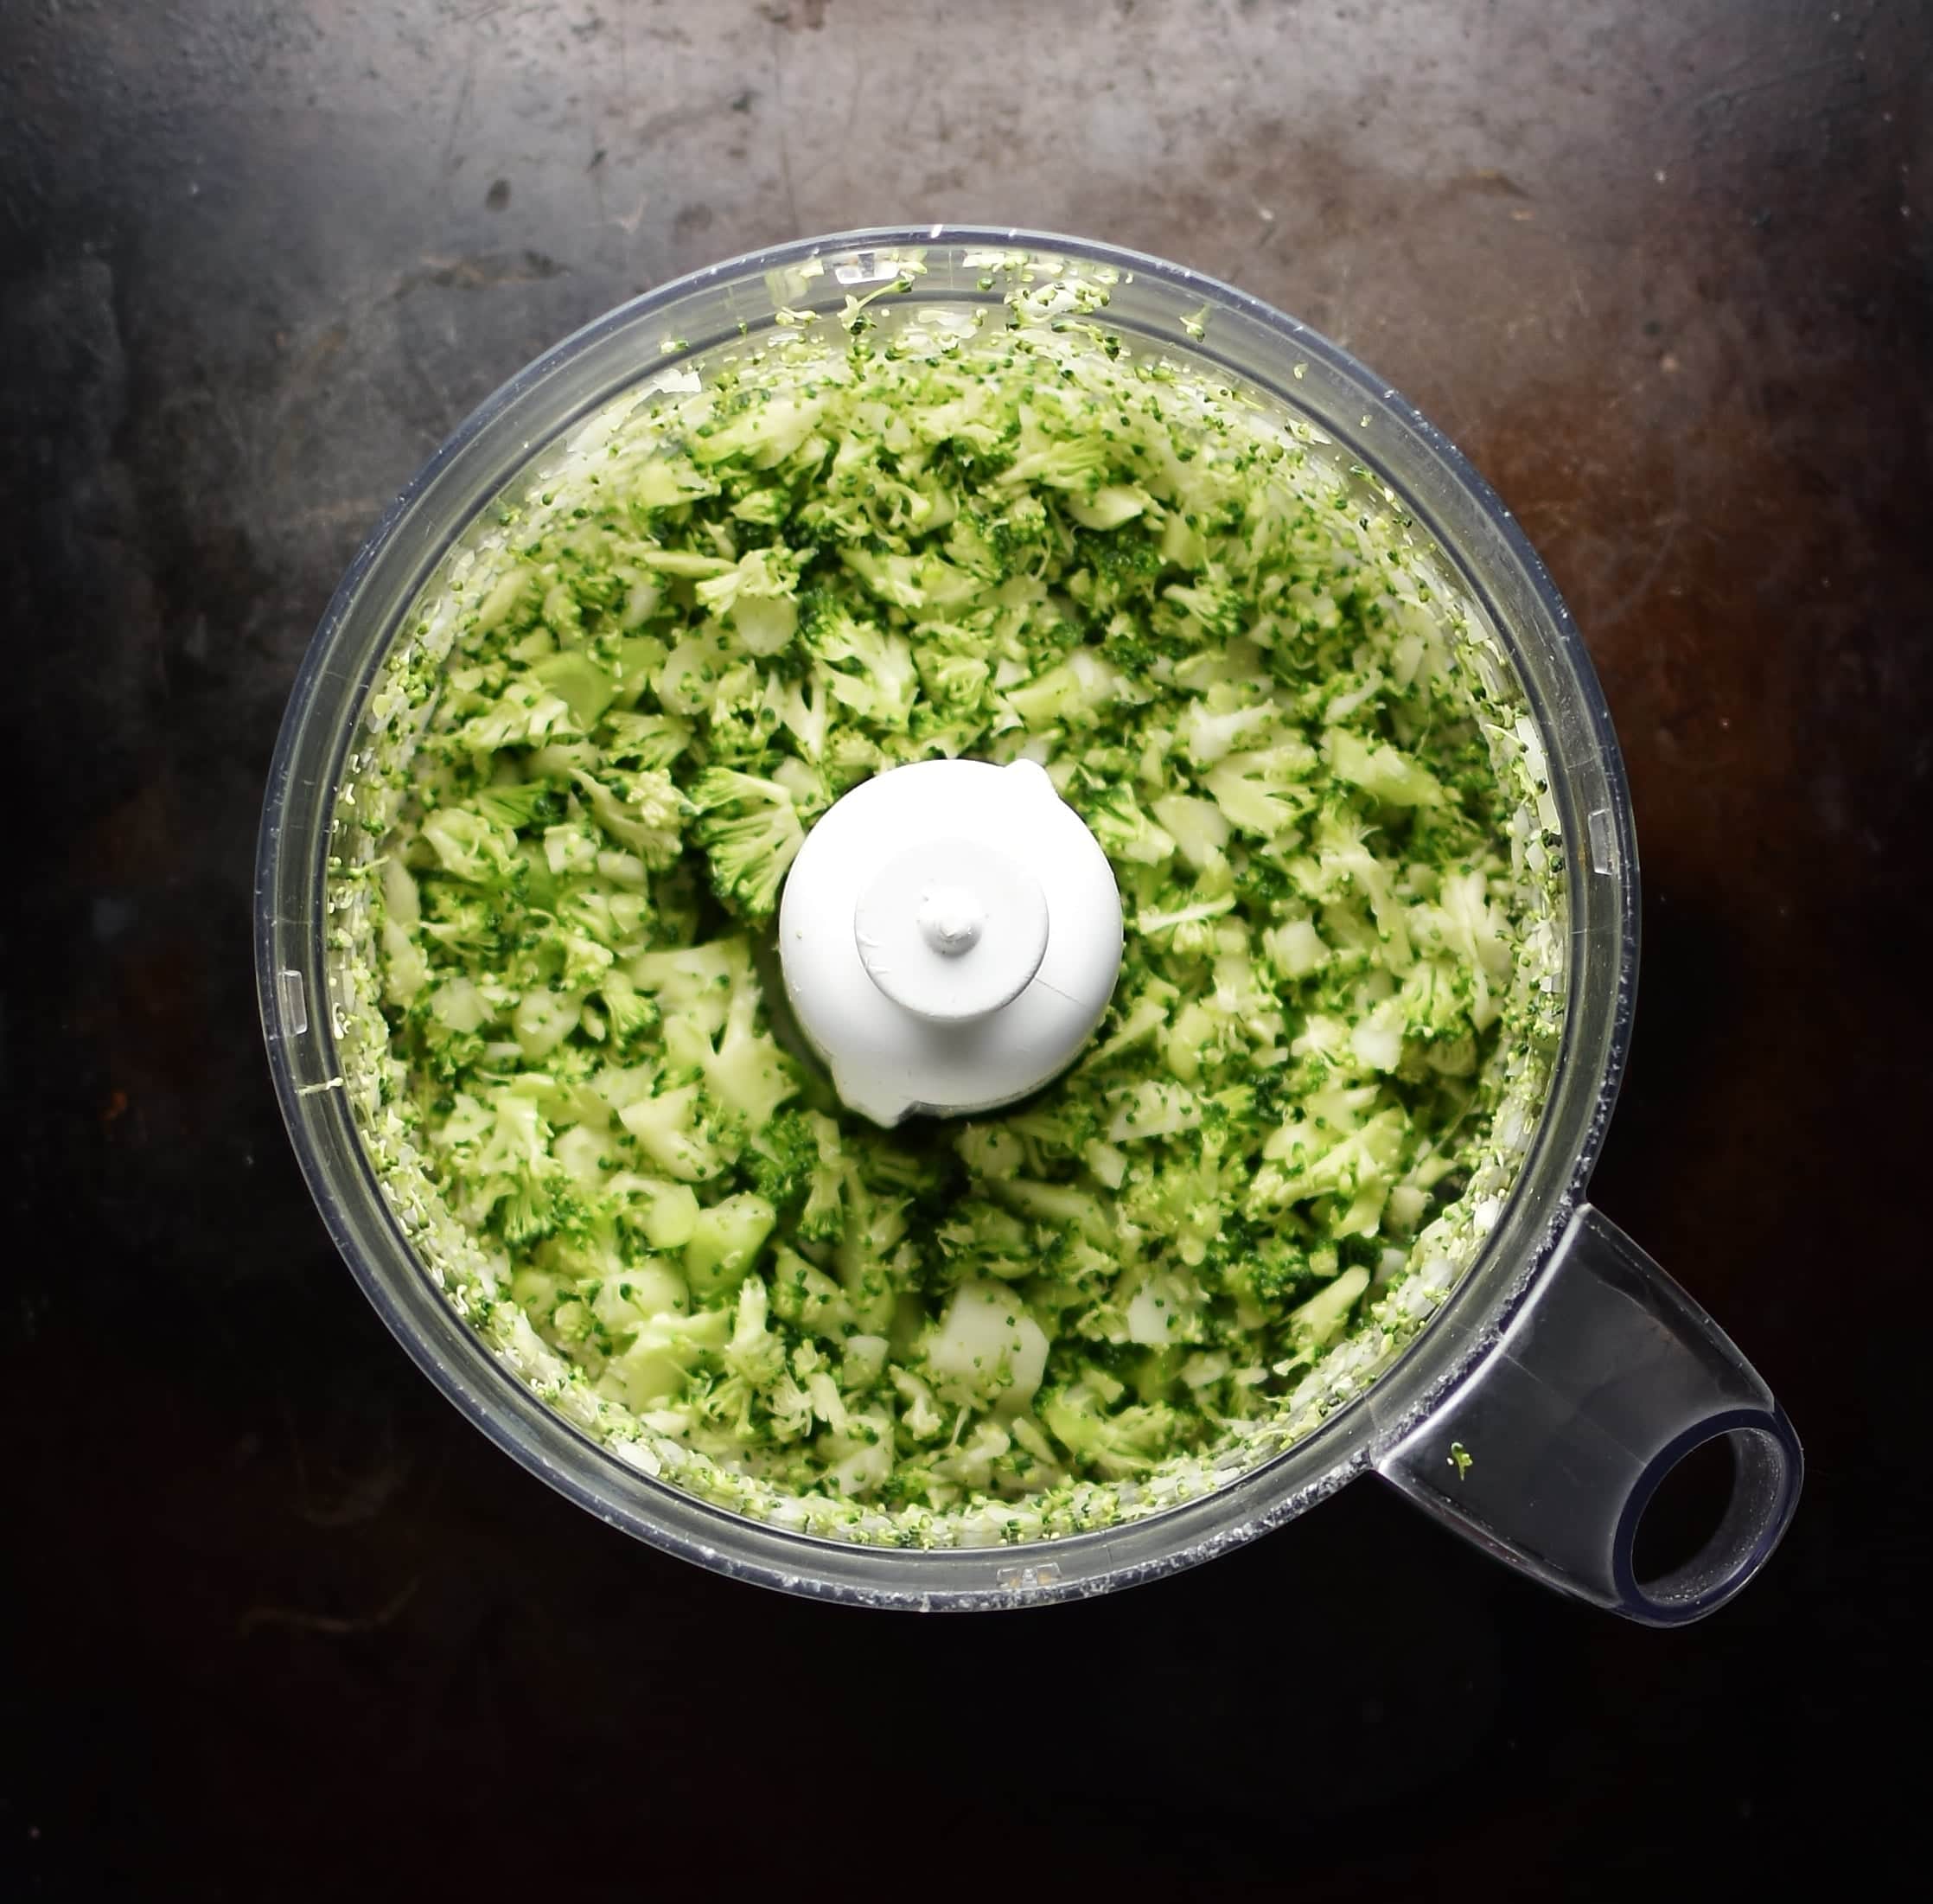 Top down view of broccoli rice in blender on dark surface.